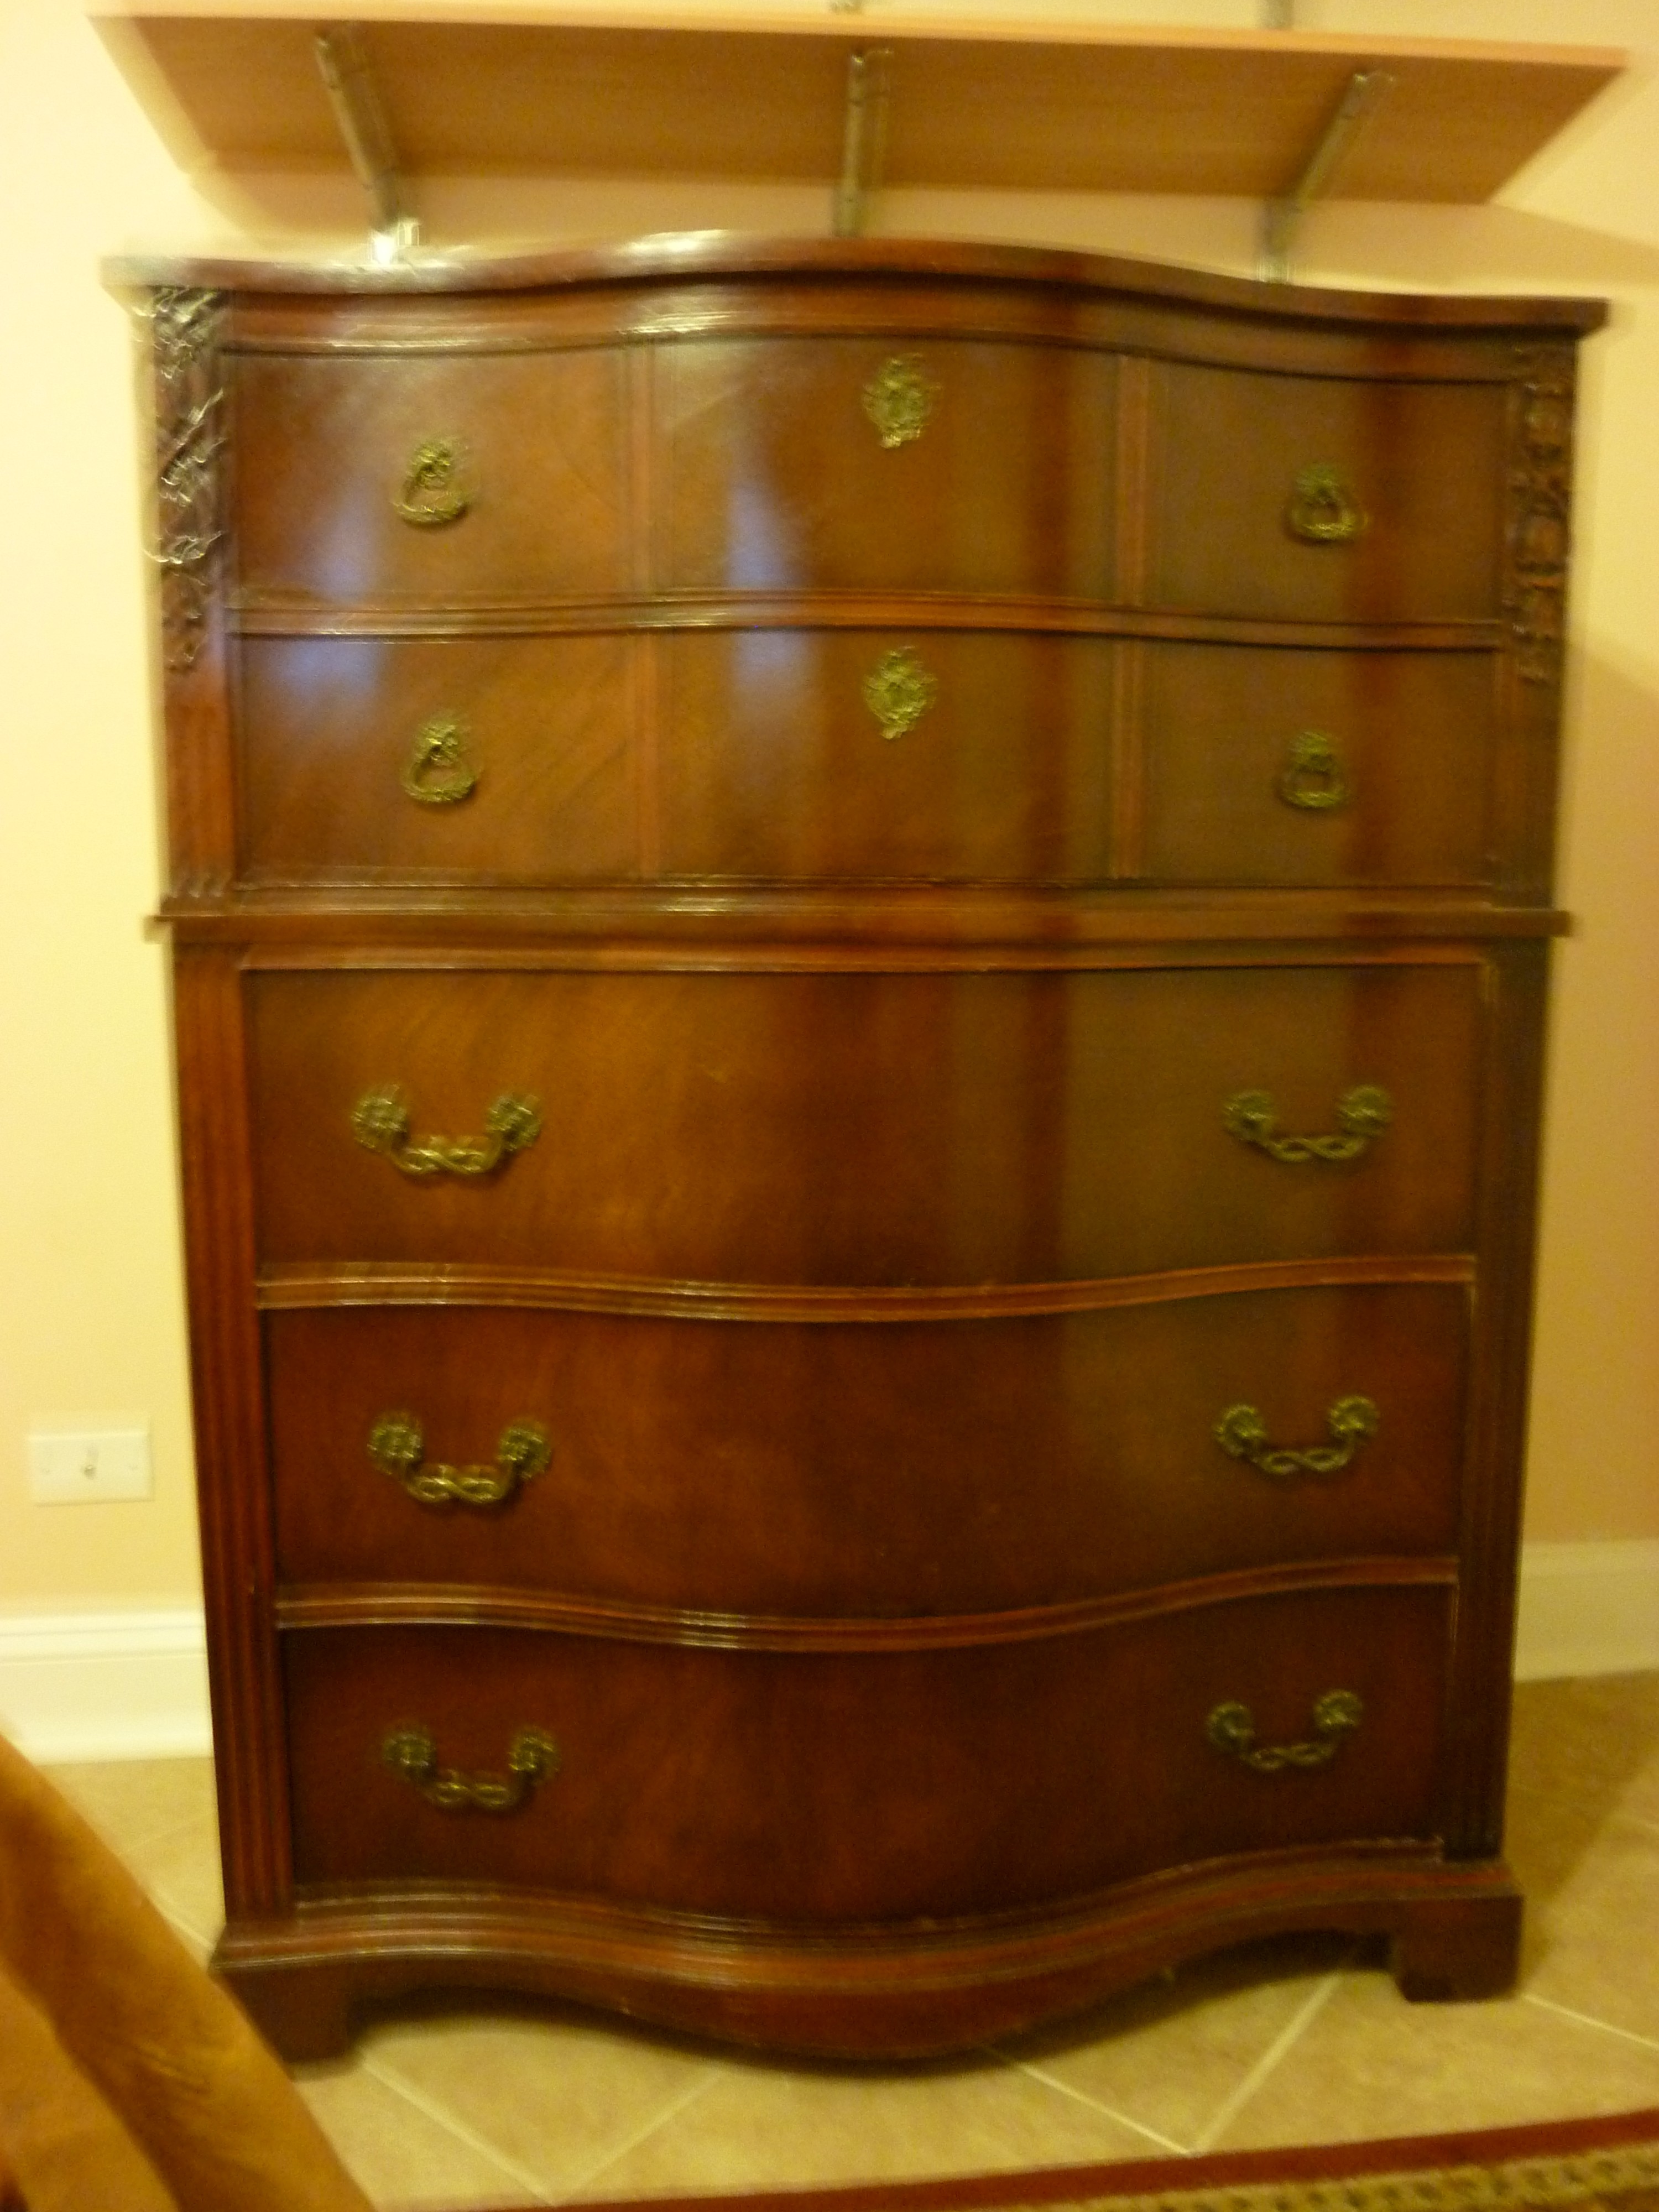 Thrift store chest of drawers